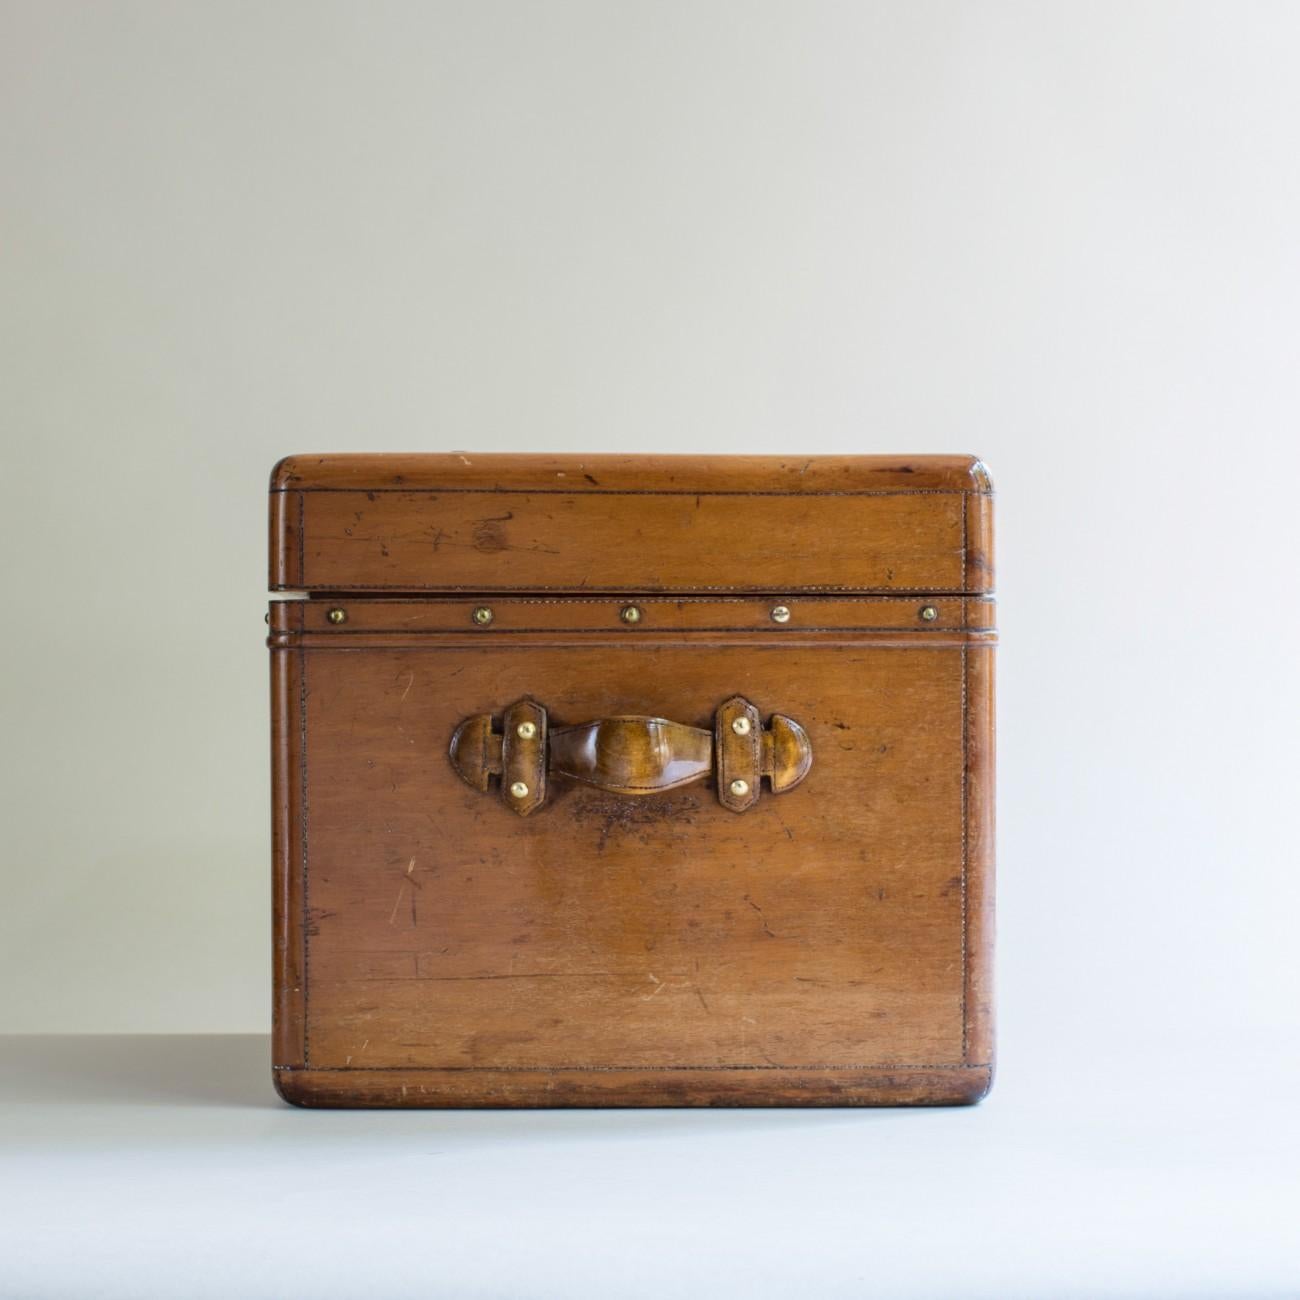 Early 20th Century Carved Wooden Trunk/Smokers Compendium, circa 1900